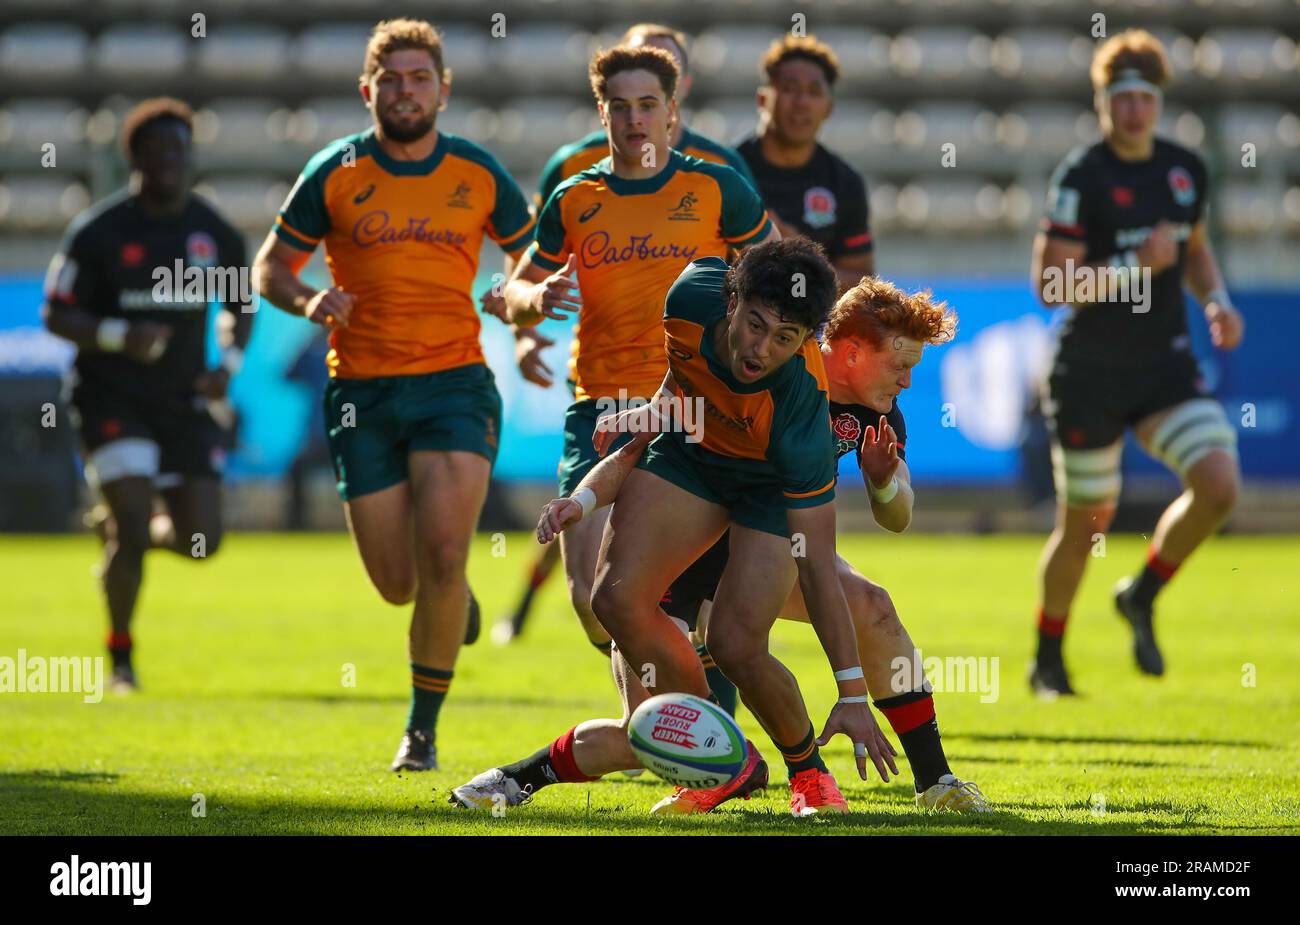 Cape Town, SOUTH AFRICA - Tuesday 04 July 2023, Ronan Leahy of Australia is tackled by Lewis Chessum of England during the World Rugby U20 Championship match between Australia and England at Athlone Stadium in Cape Town, South Africa. Stock Photo